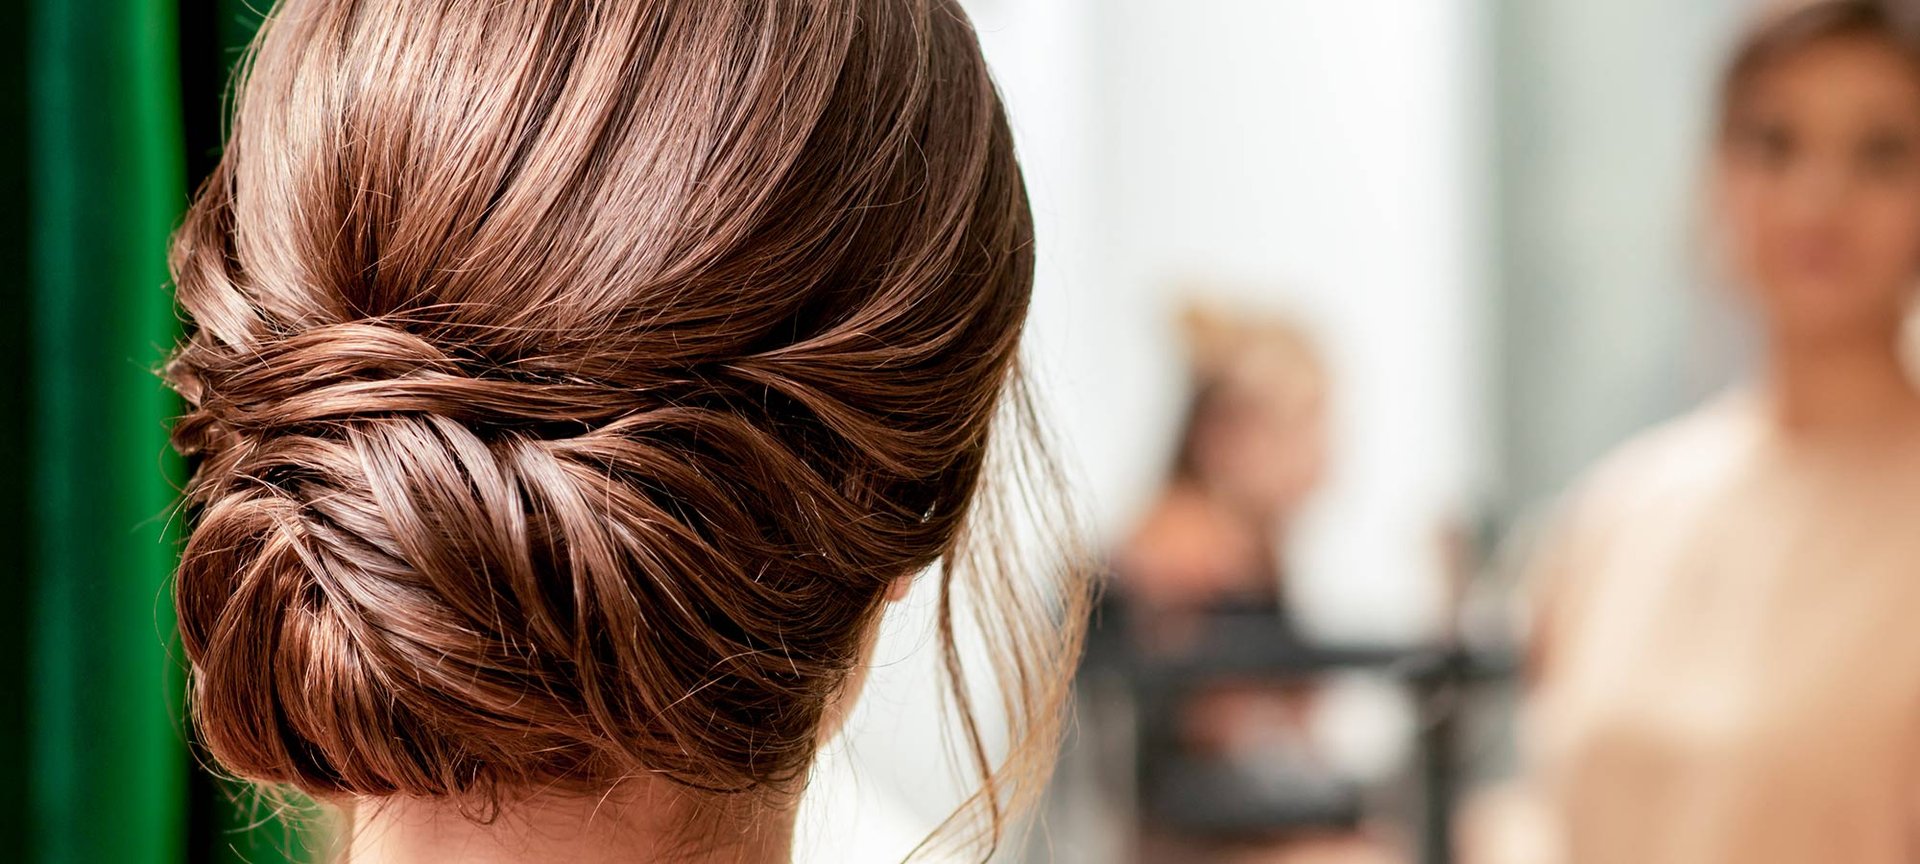 50+ Updo Hairstyles That're So Stylish : Loose French Twist